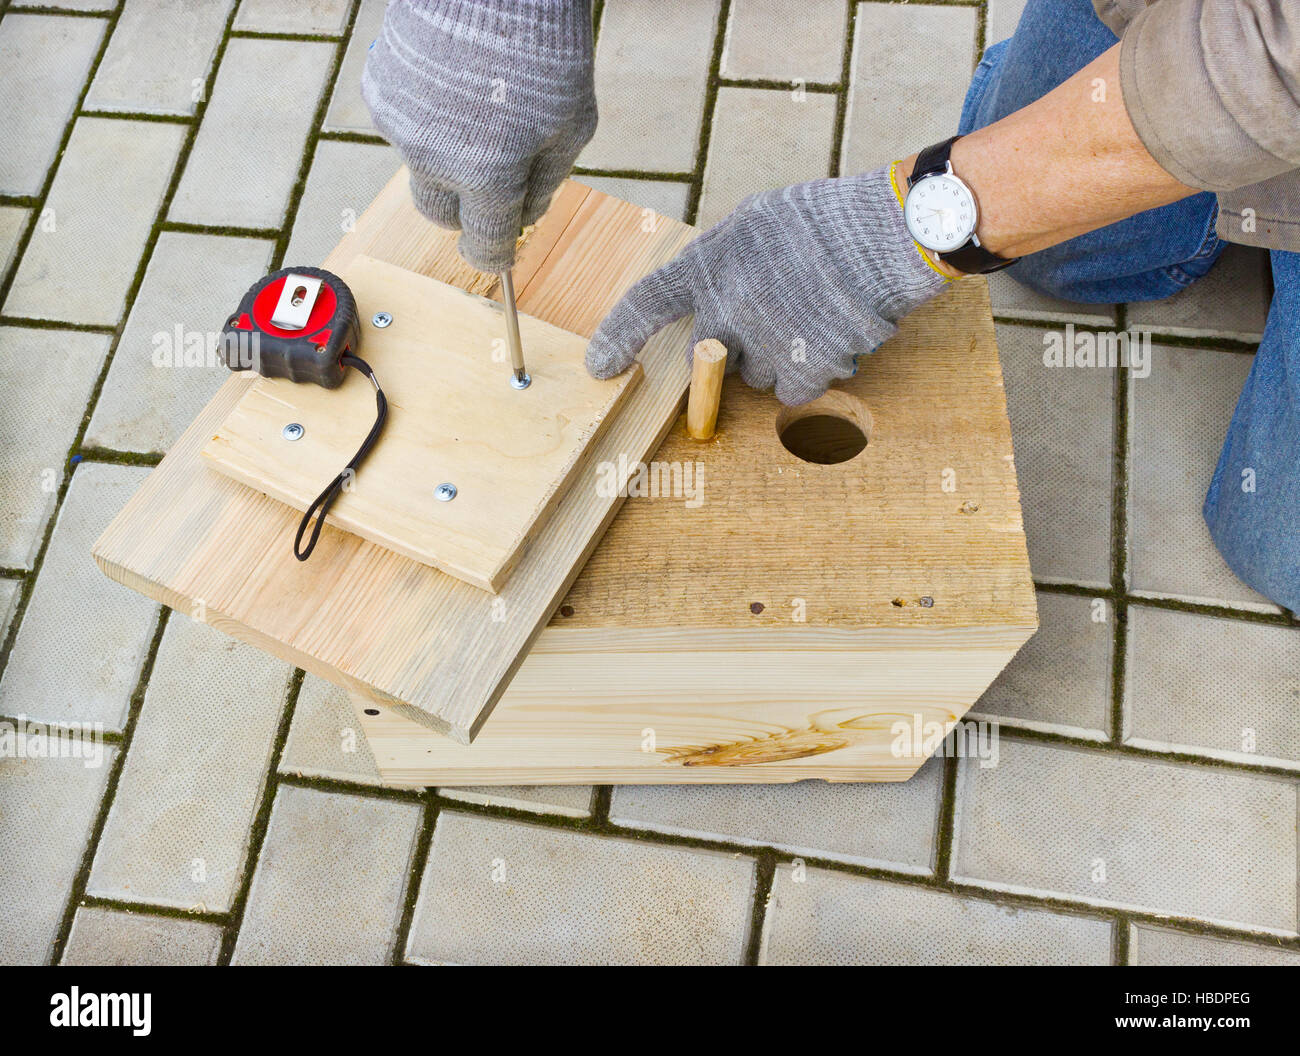 Making  birdhouse from boards Stock Photo